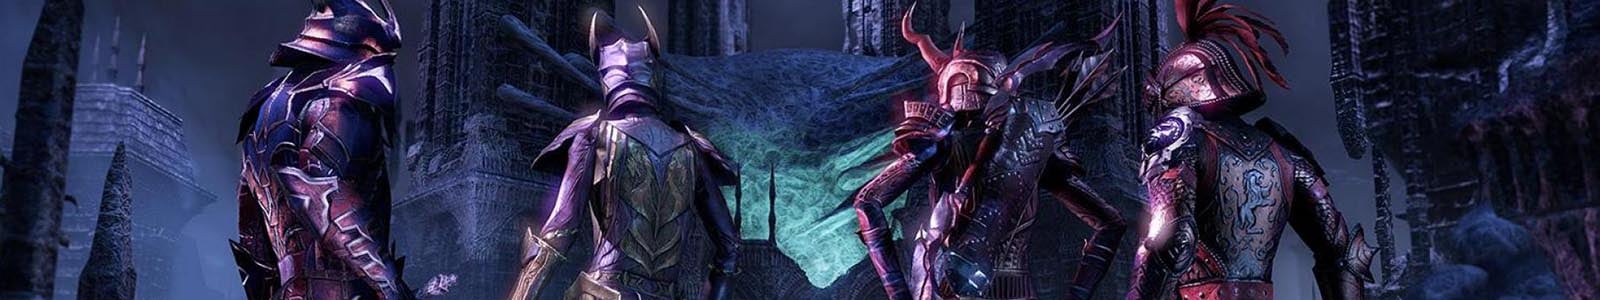 Combat Guides for ESO header